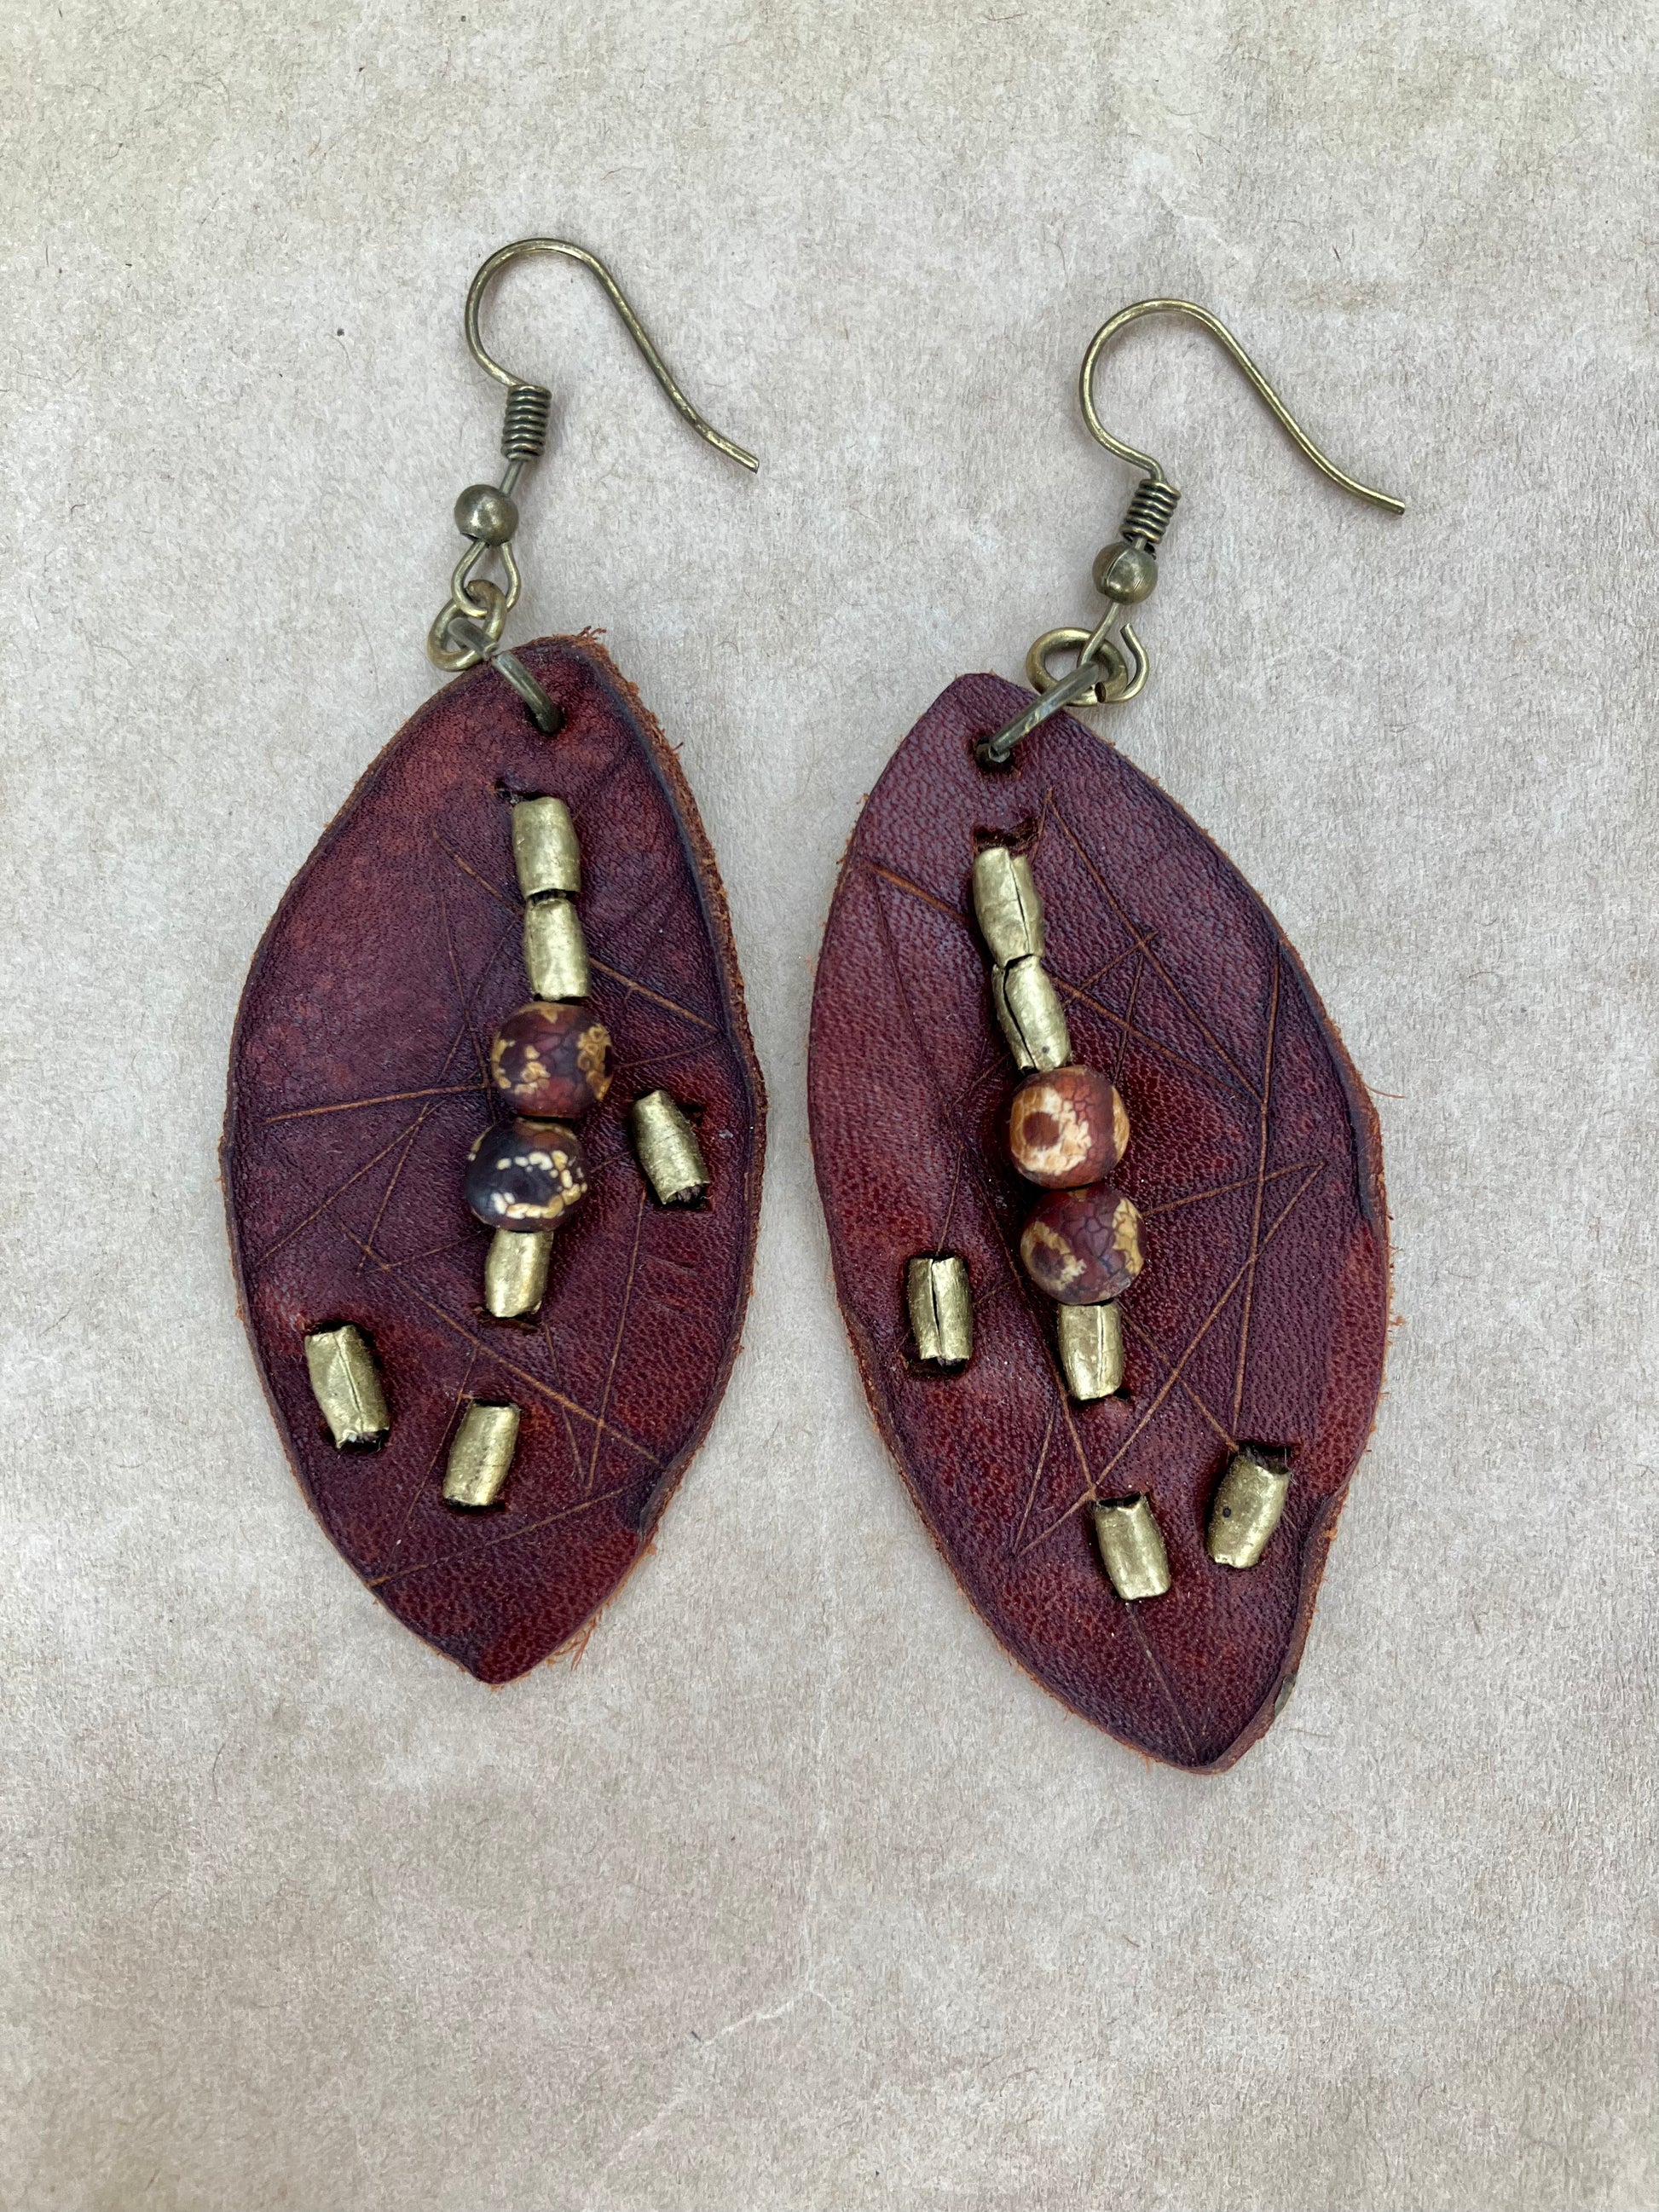 lightweight leather earrings with embossed lines; hypoallergenic, nickel free; antique brass and agate beads; 3 inch high; handmade.